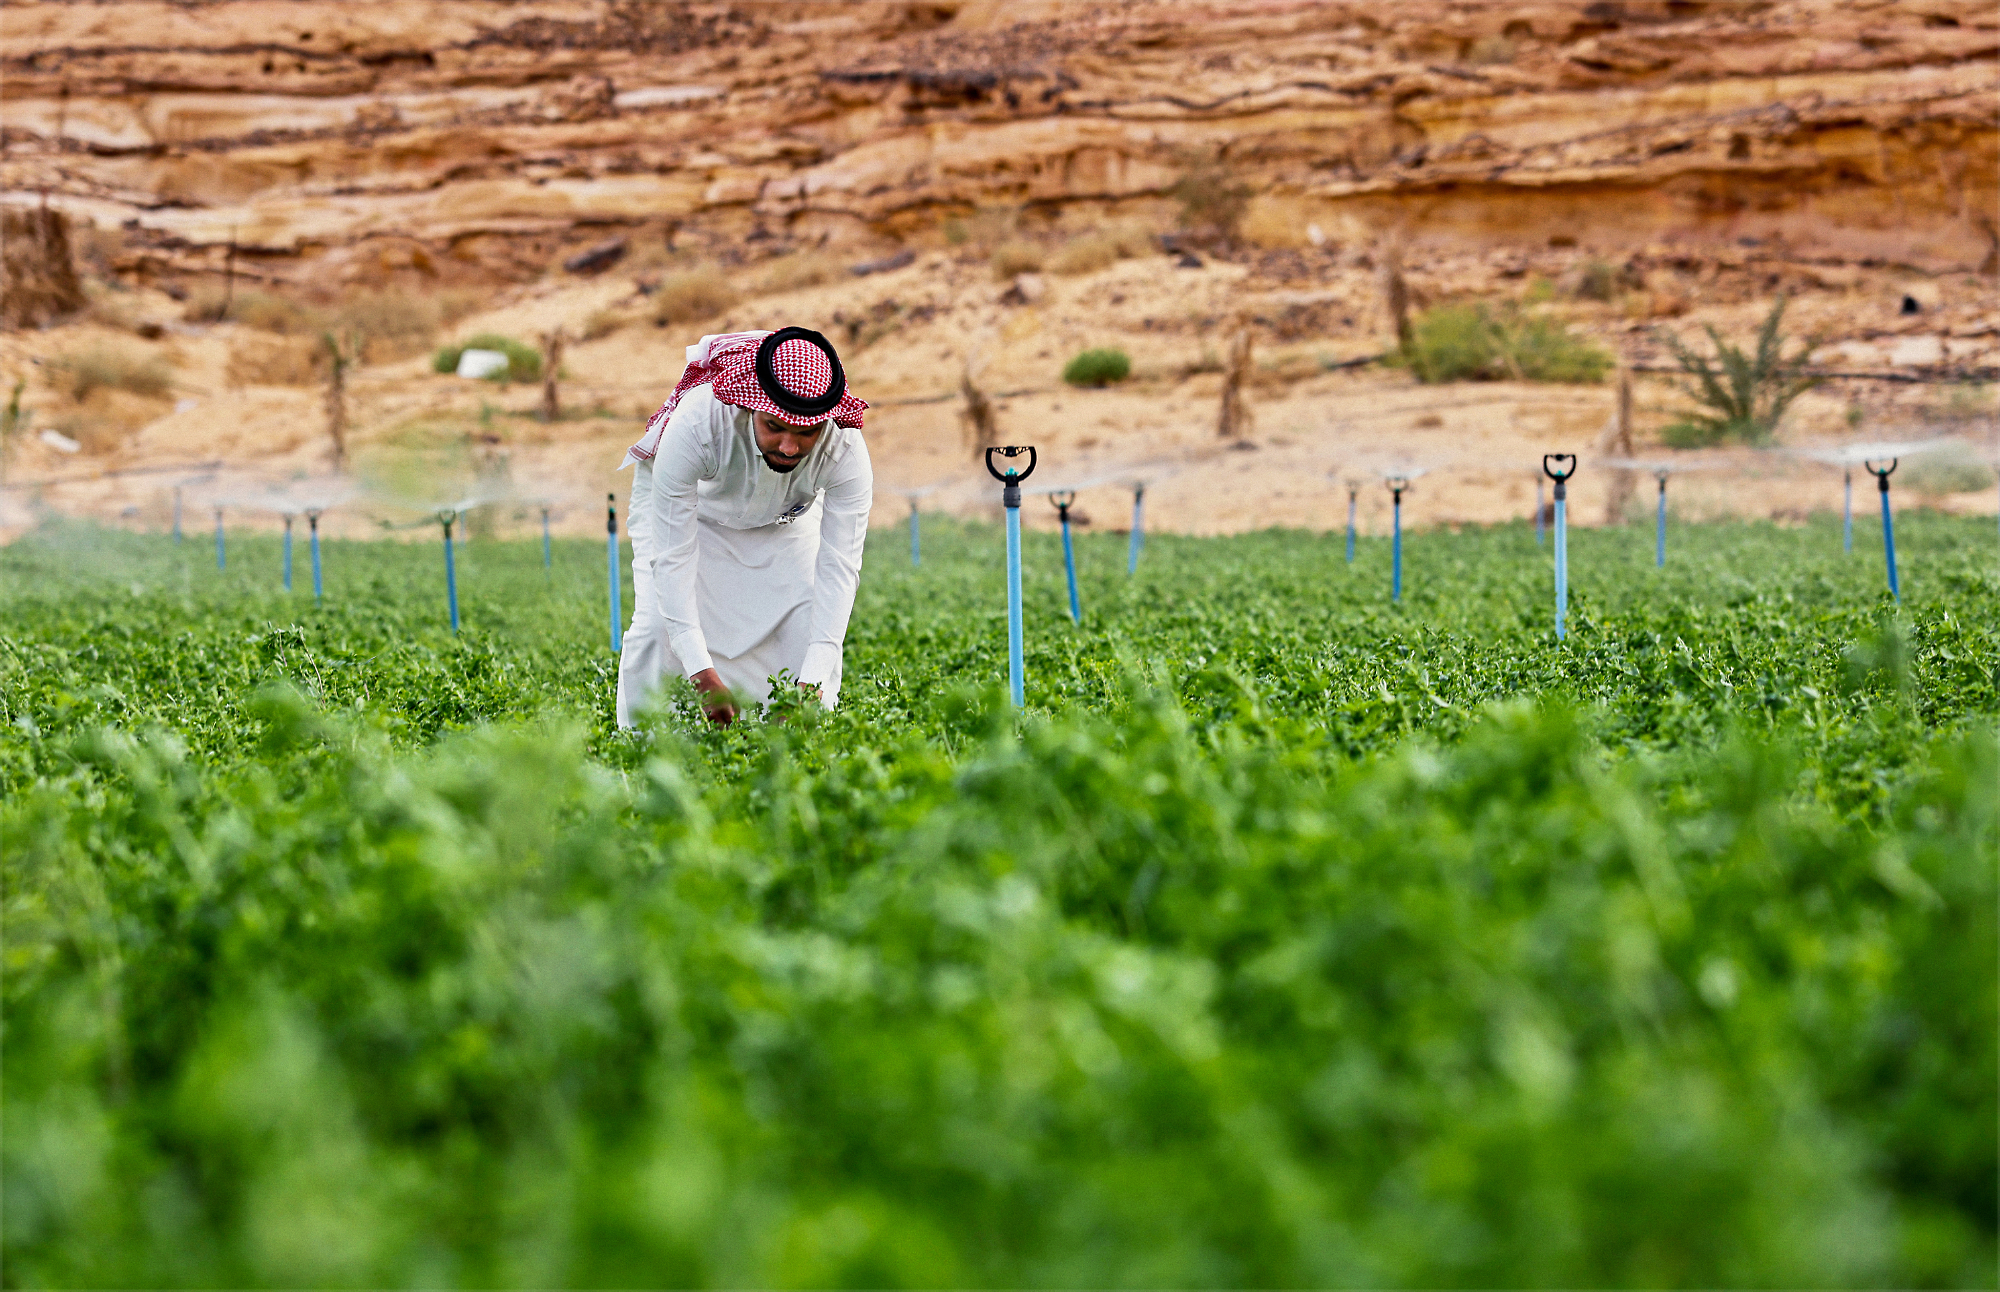 A person wearing a traditional garment is working on a lush green farm with irrigation sprinklers